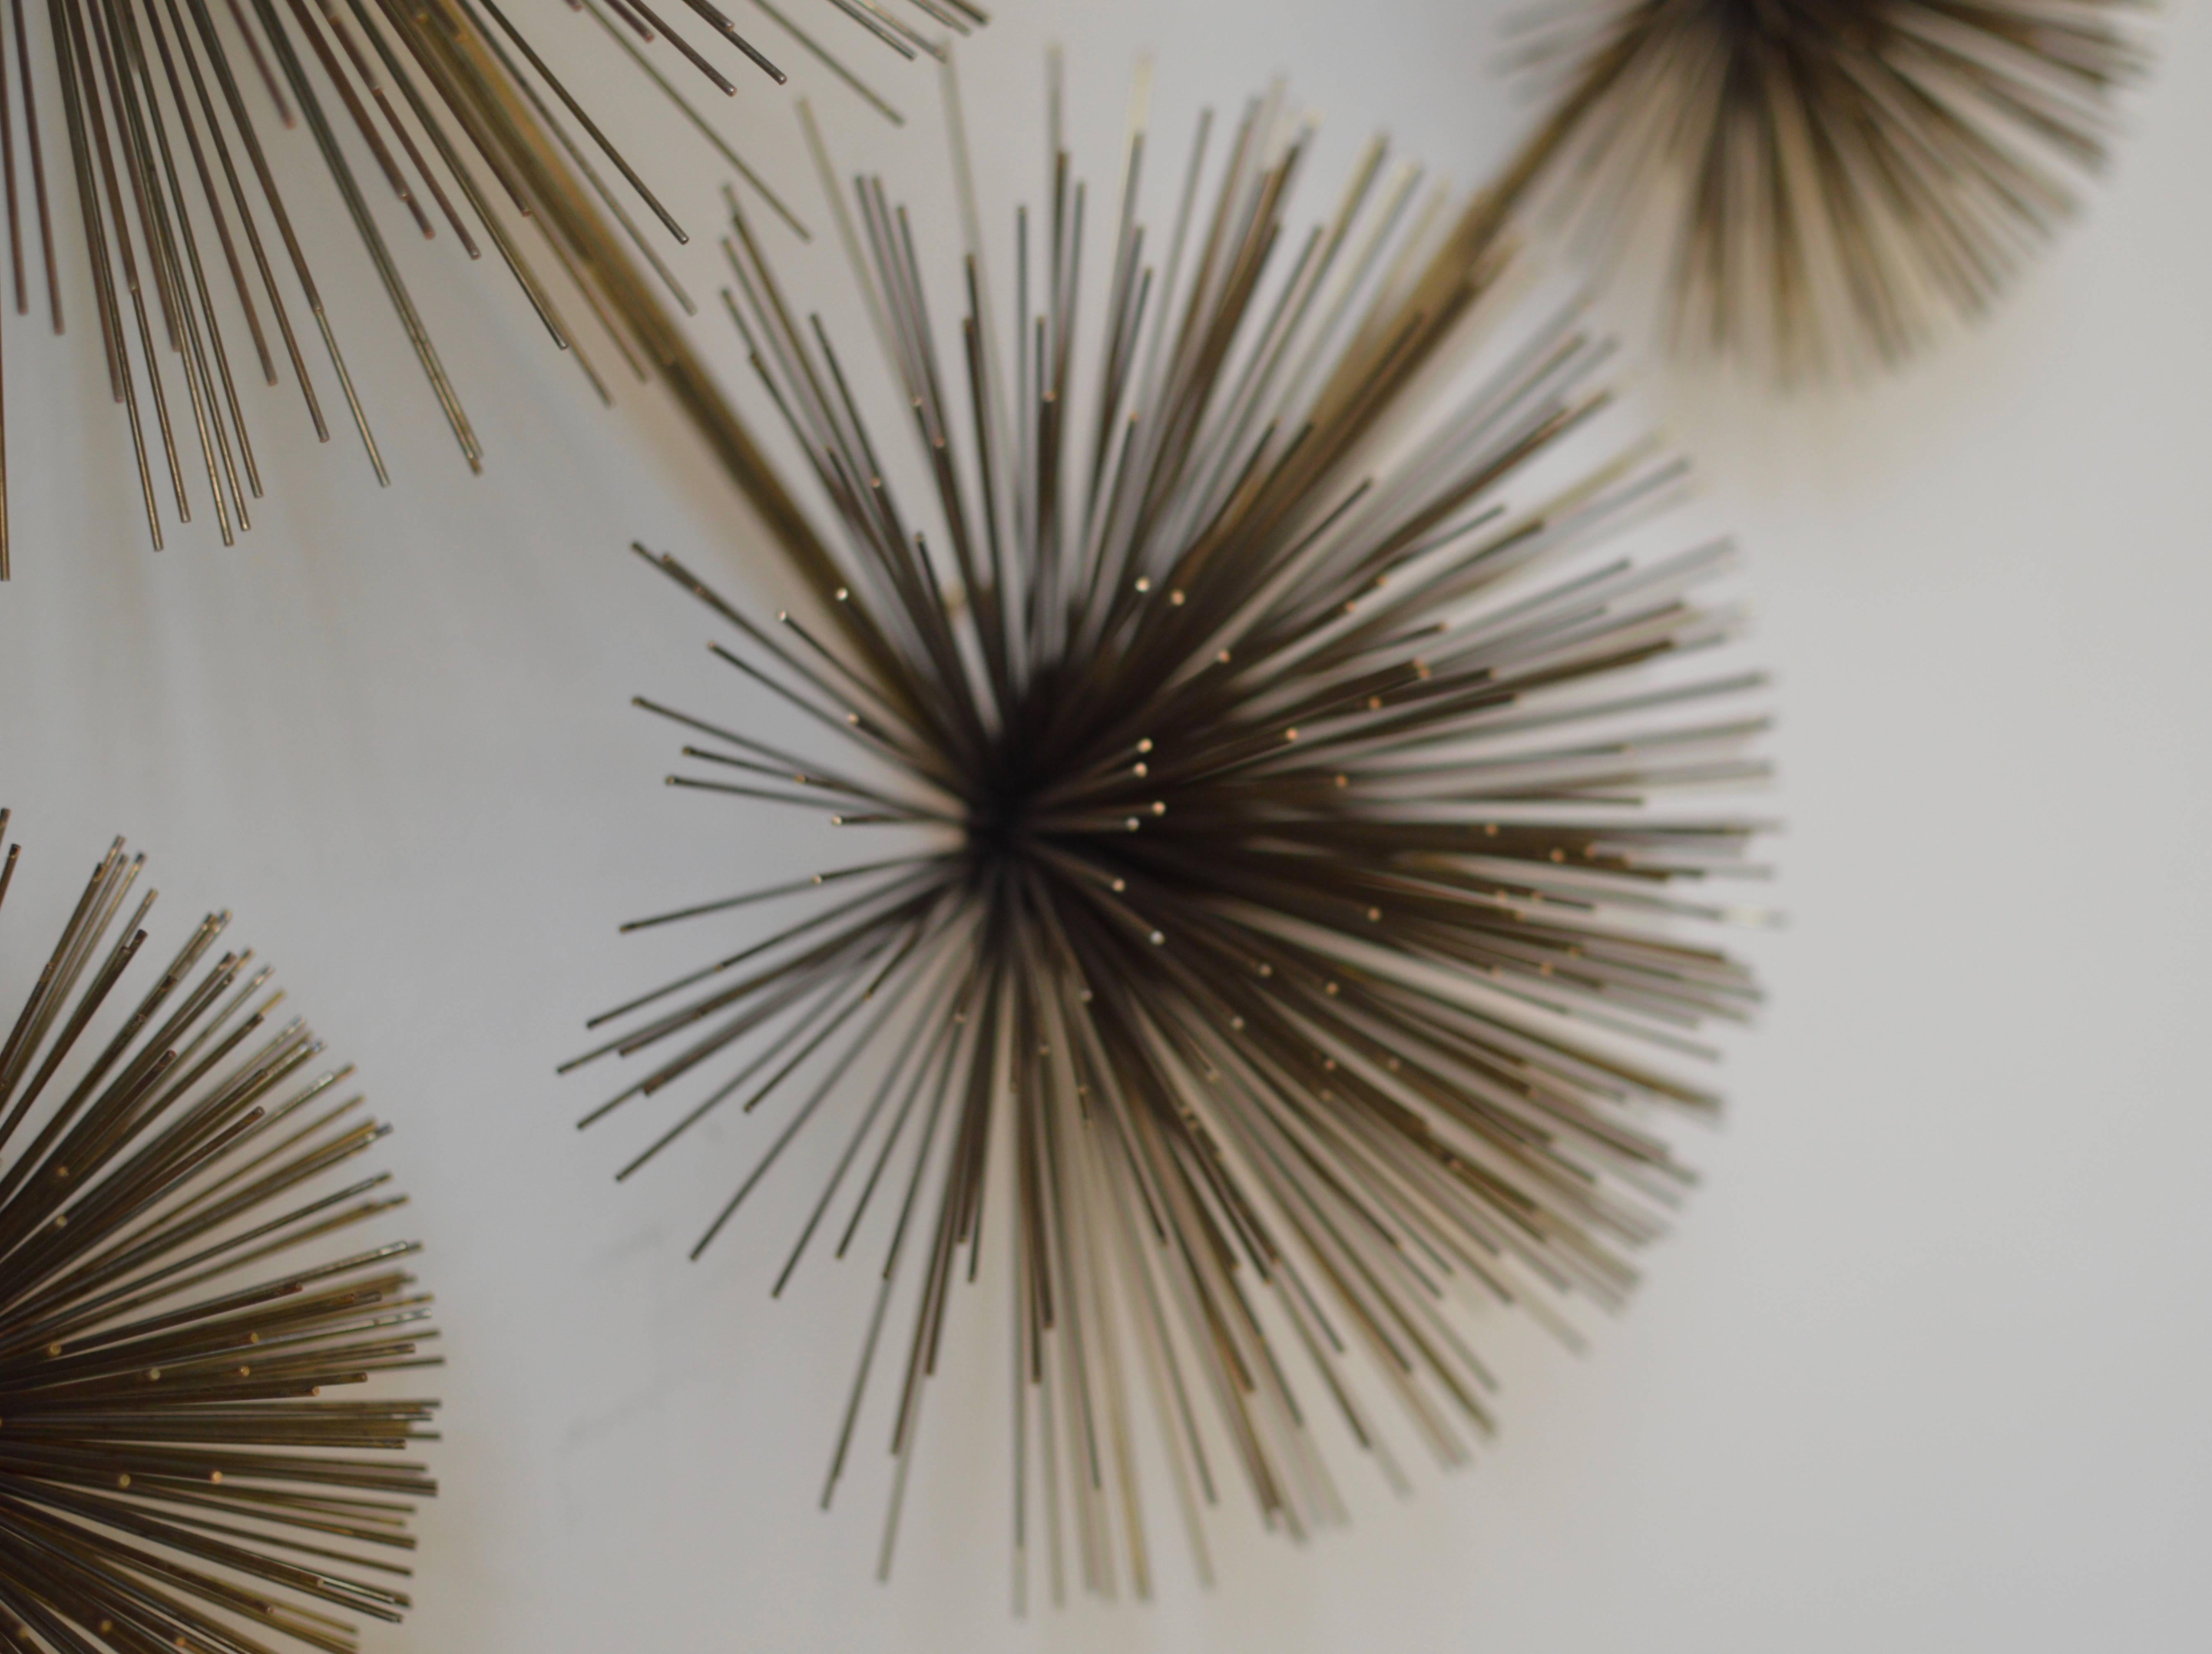 Metal 'Pom Pom' or 'Sea Urchin' wall sculpture executed in brass, fully signed and dated, 'C Jere 1979' in wonderful original vintage condition.
Sculpture can hang by one to three hooks in horizontal or vertical.